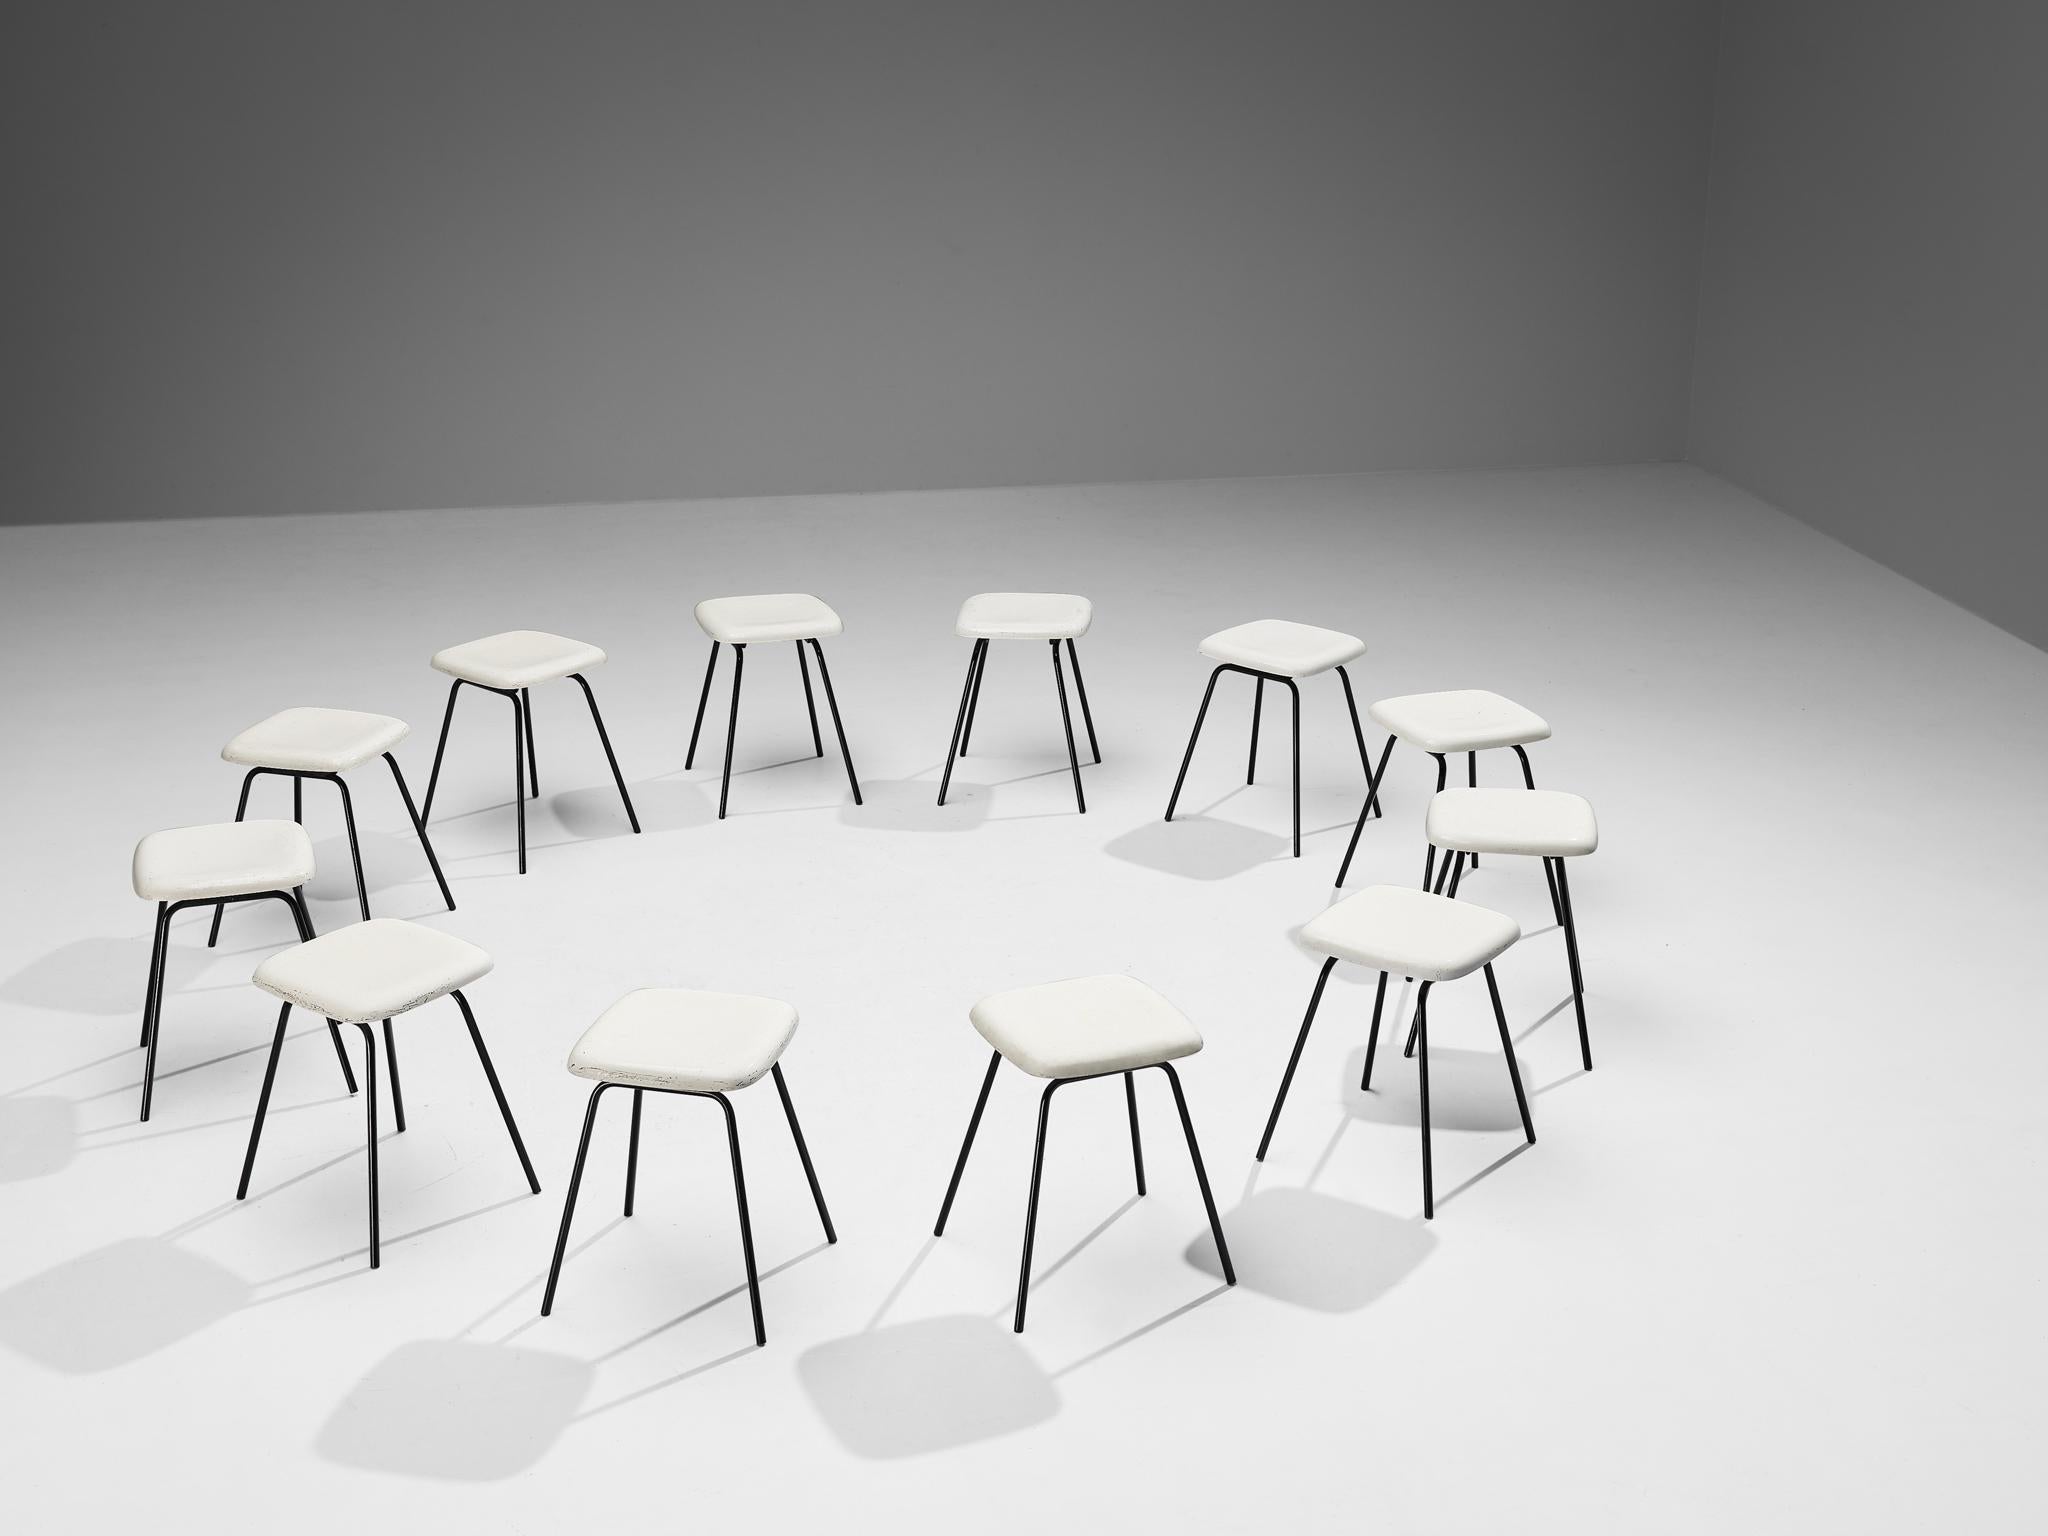 Mid-20th Century Modern Stools in White Fiberglass and Black Coated Steel For Sale